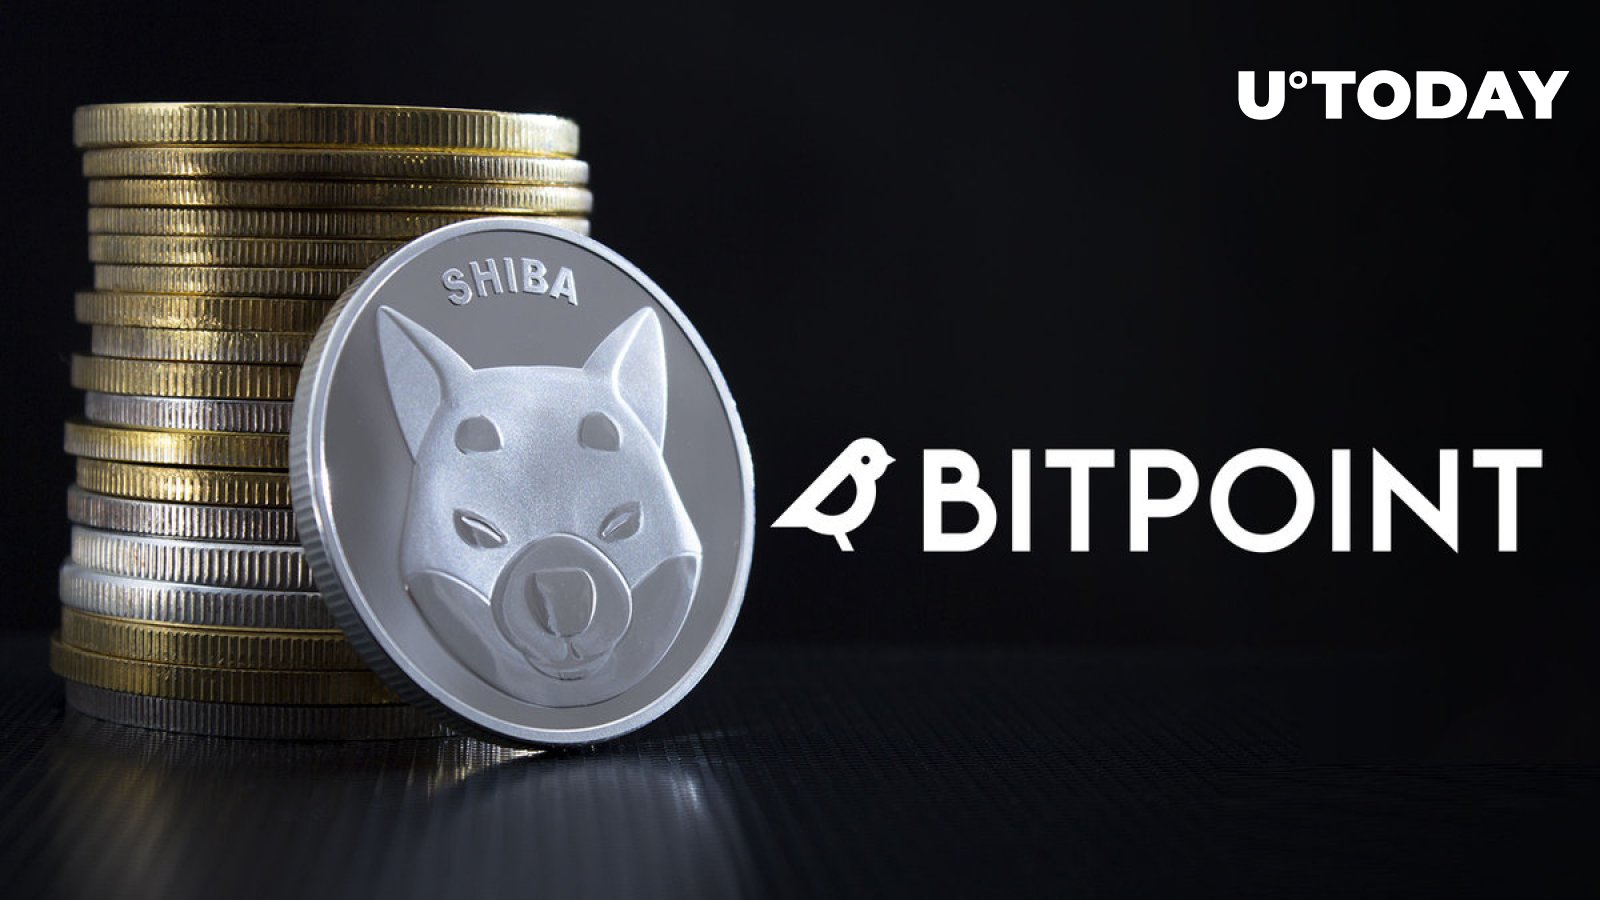 Millions of SHIB to Be Gifted During Listing on Major Japanese Crypto Exchange